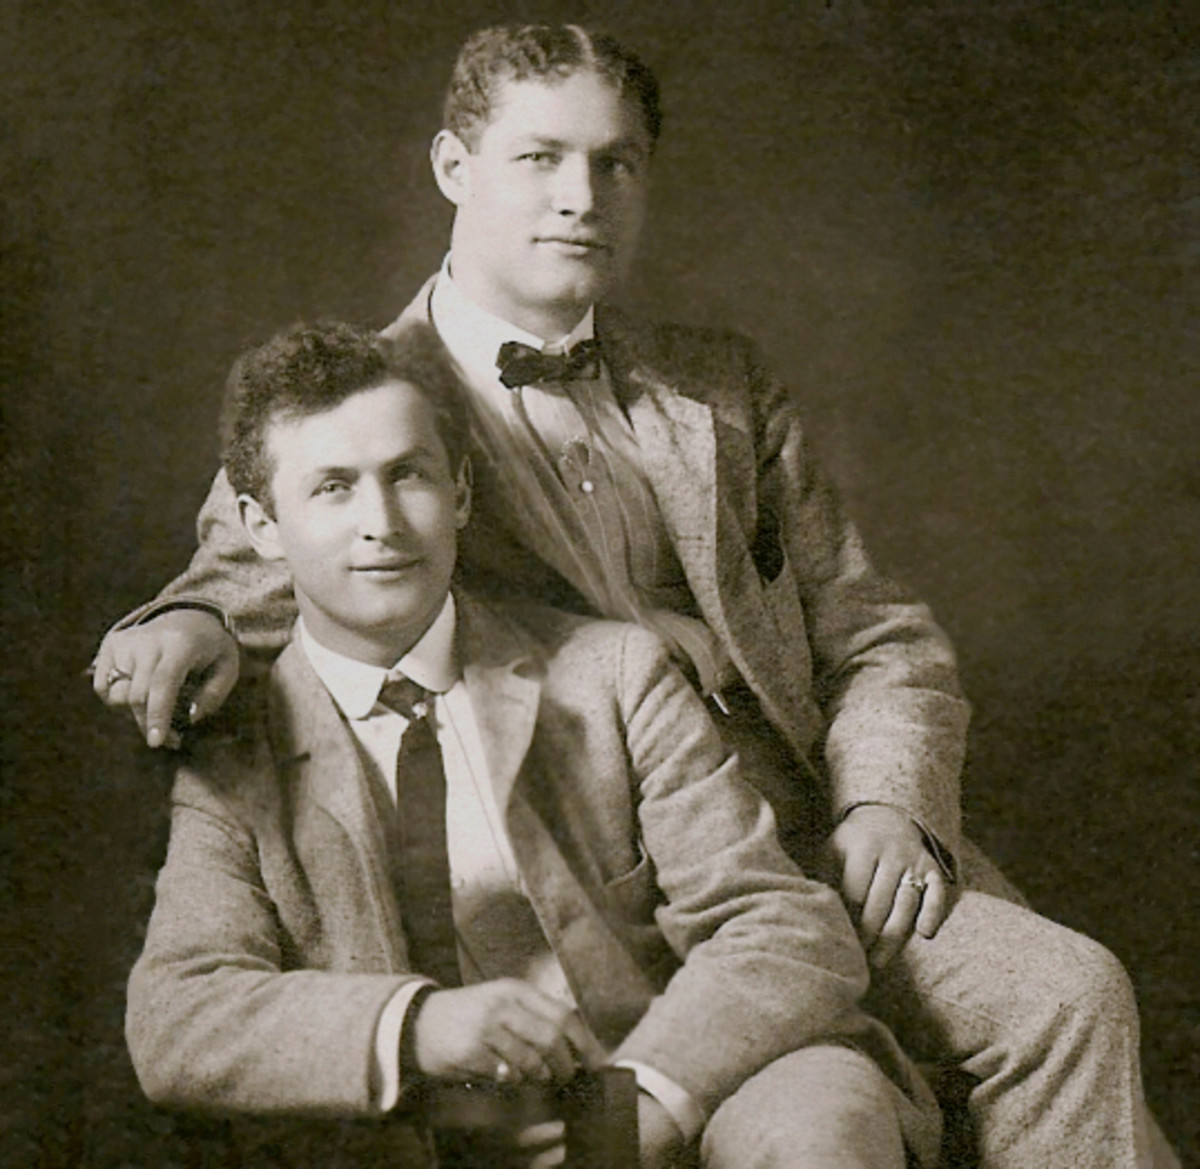 Brothers Theodore Hardeen (top) and Harry Houdini.